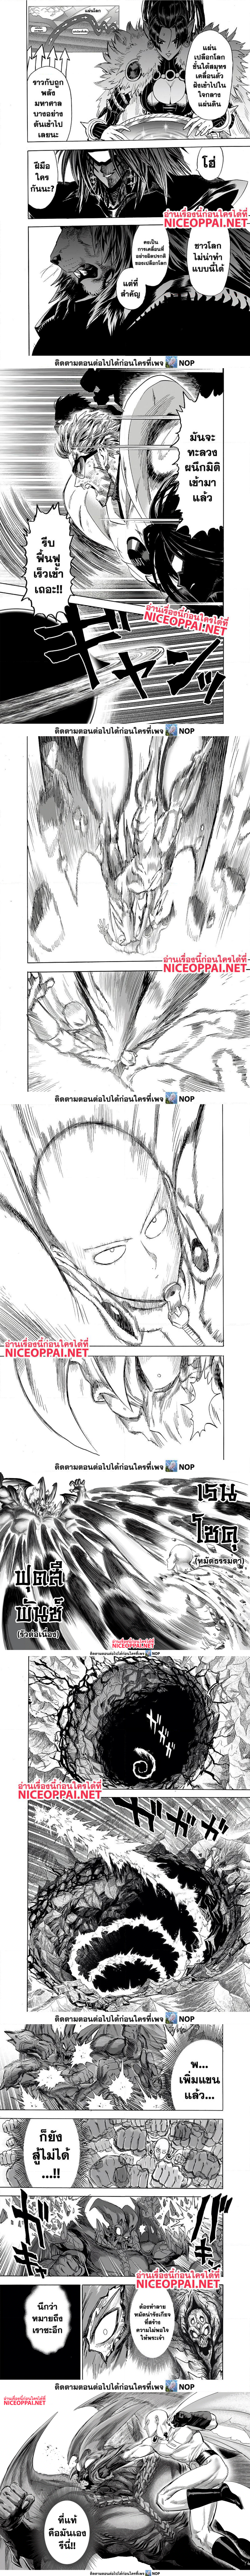 One Punch Man 164 (3)